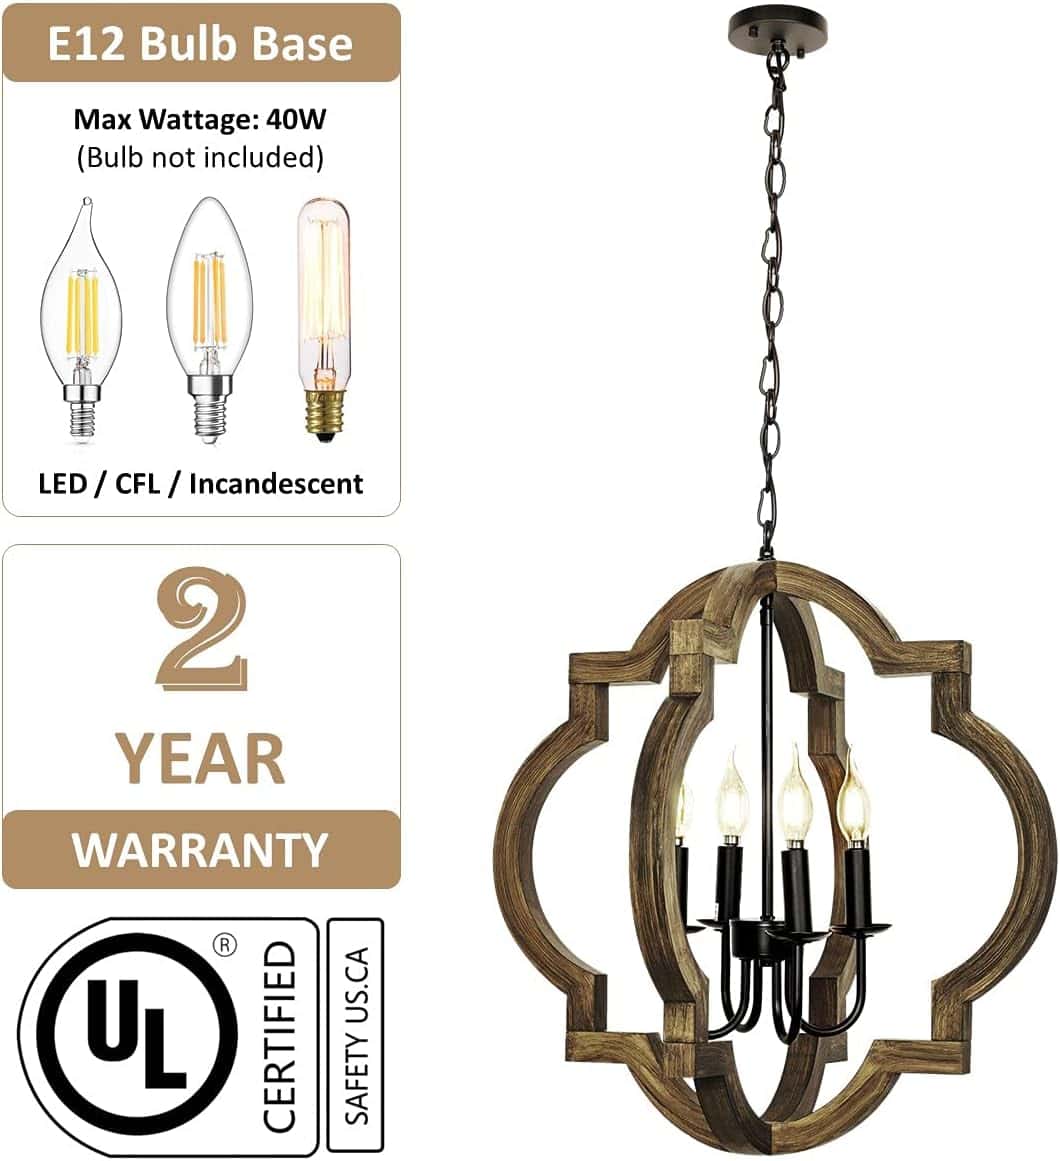 21.7 Farmhouse orb Chandelier 4-Light Adjustable Height Handmade Rustic Wood Light Fixture for Foyer Dining&Living Room Kitchen Island Entryway Breakfast AreaColour Black 2